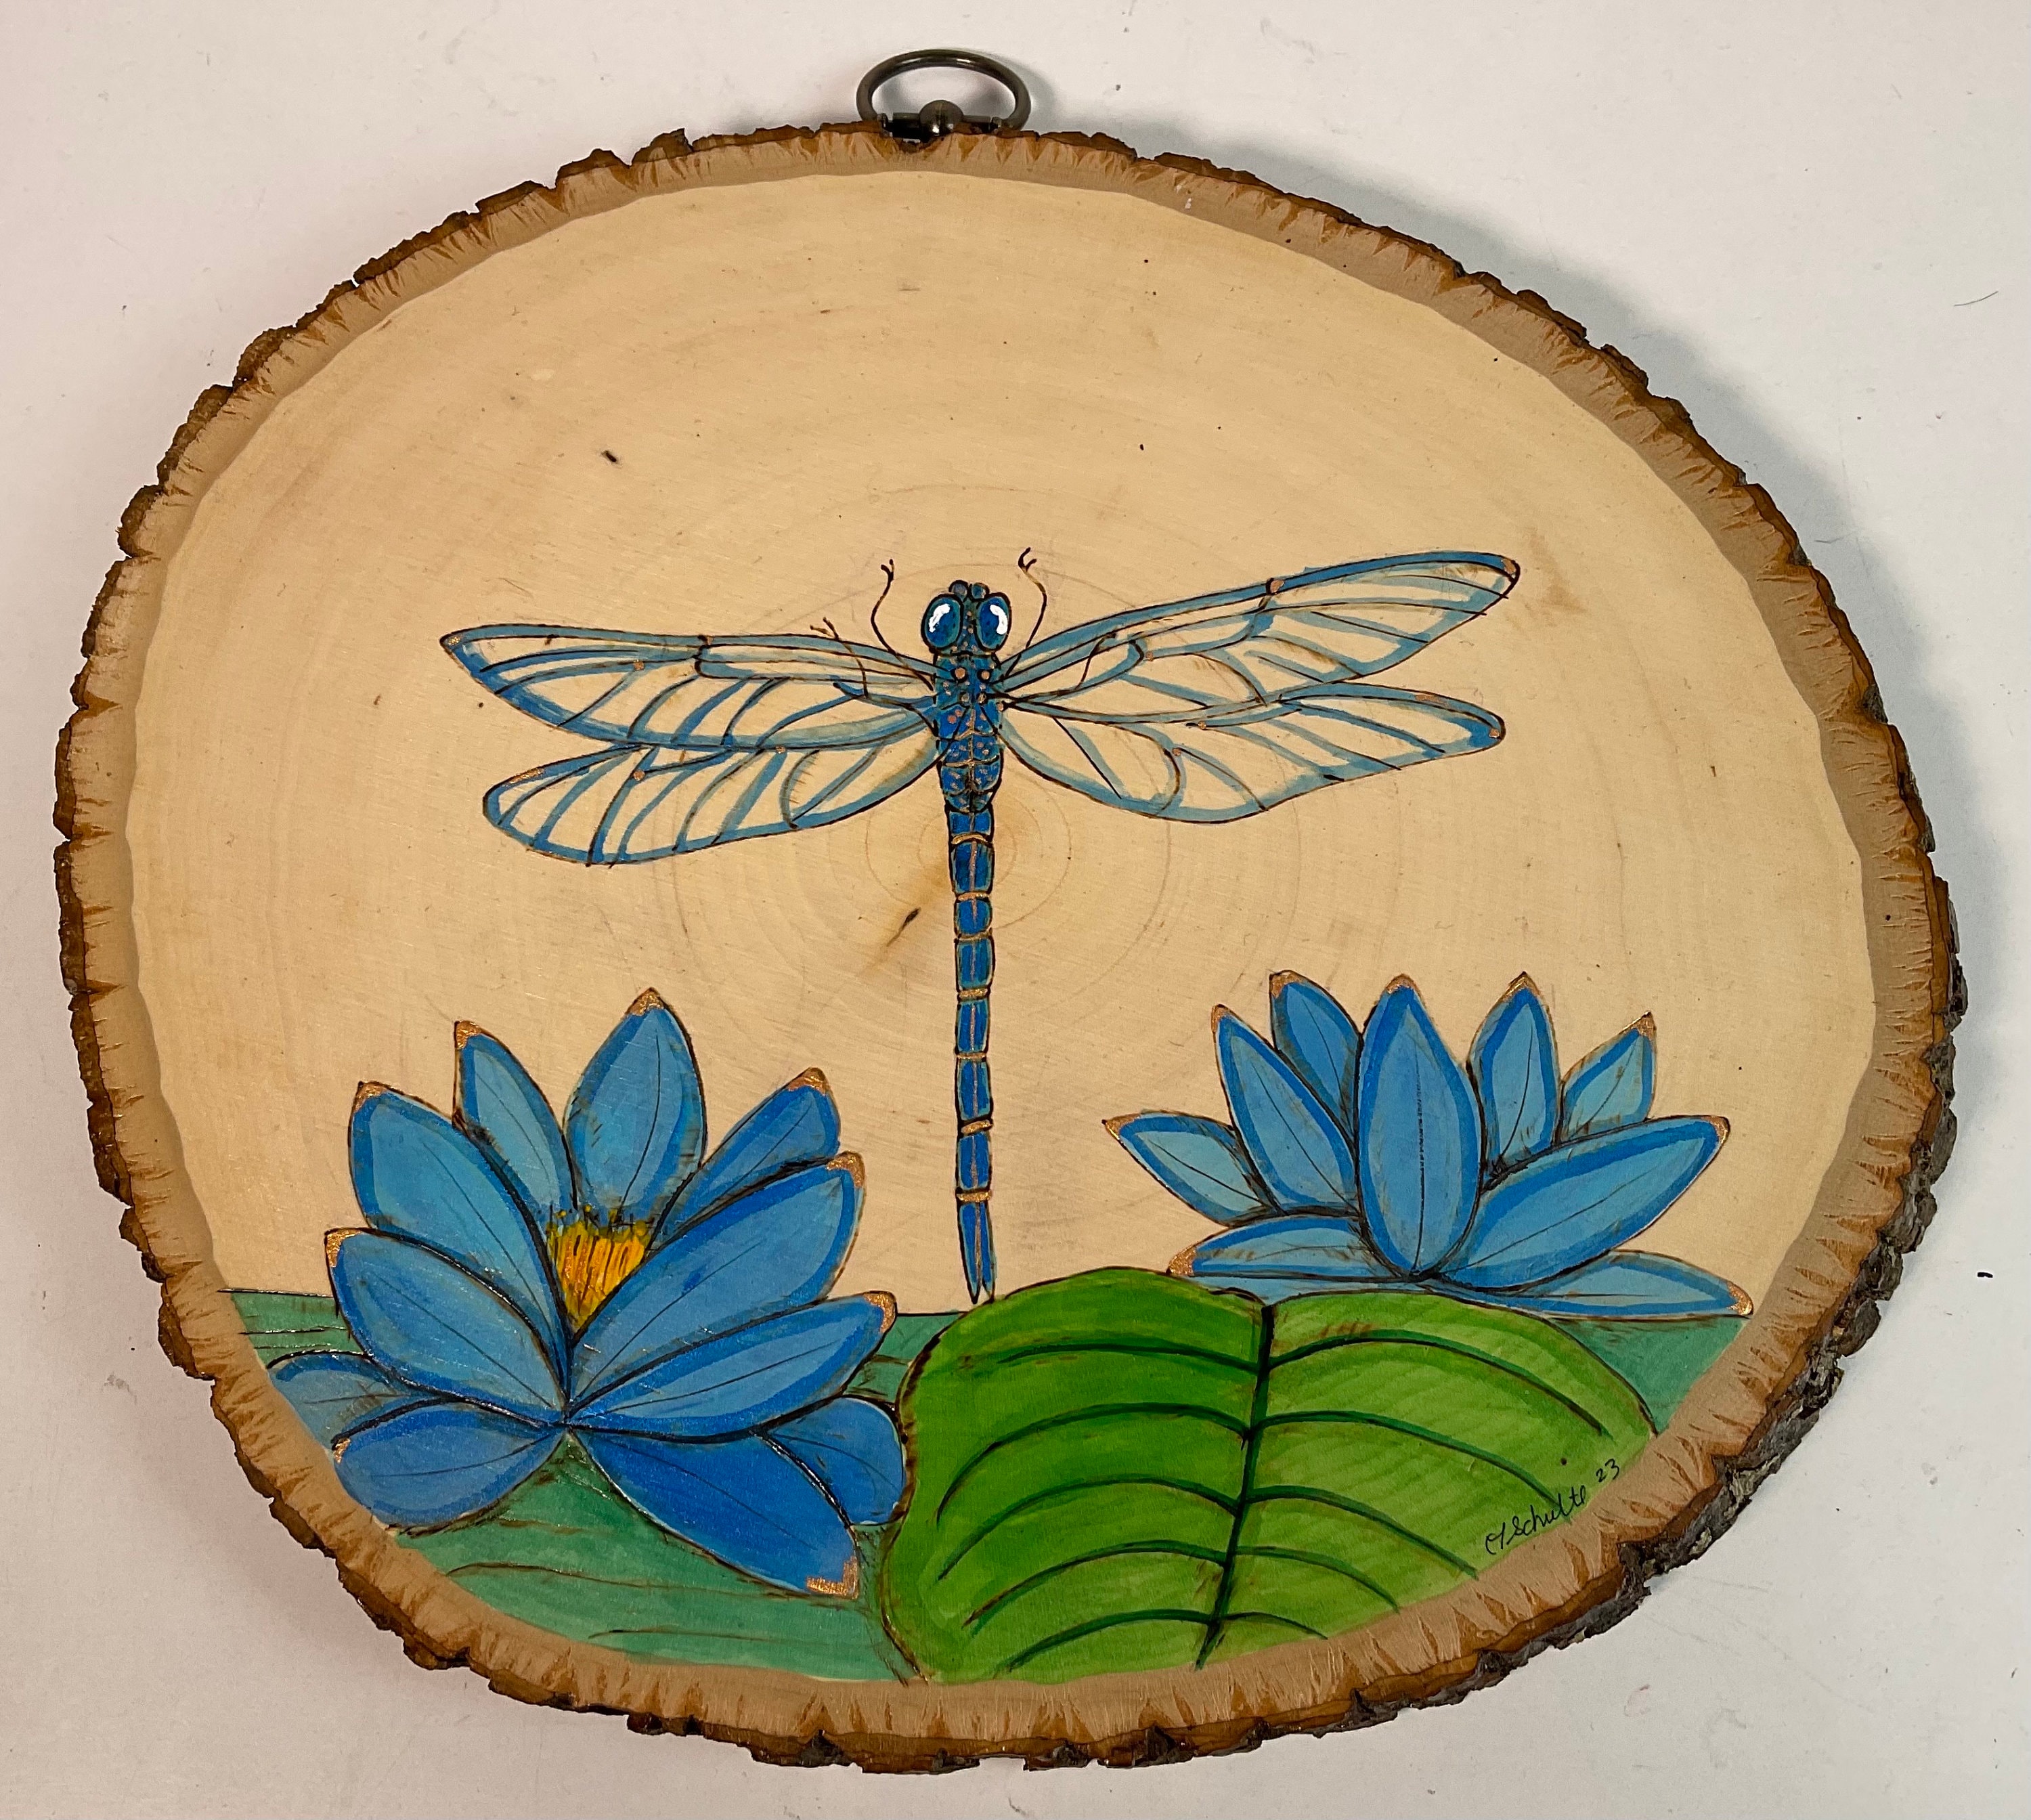 Rustic Duck Pond Pyrography Wall Art with Pewter Dragon Fly